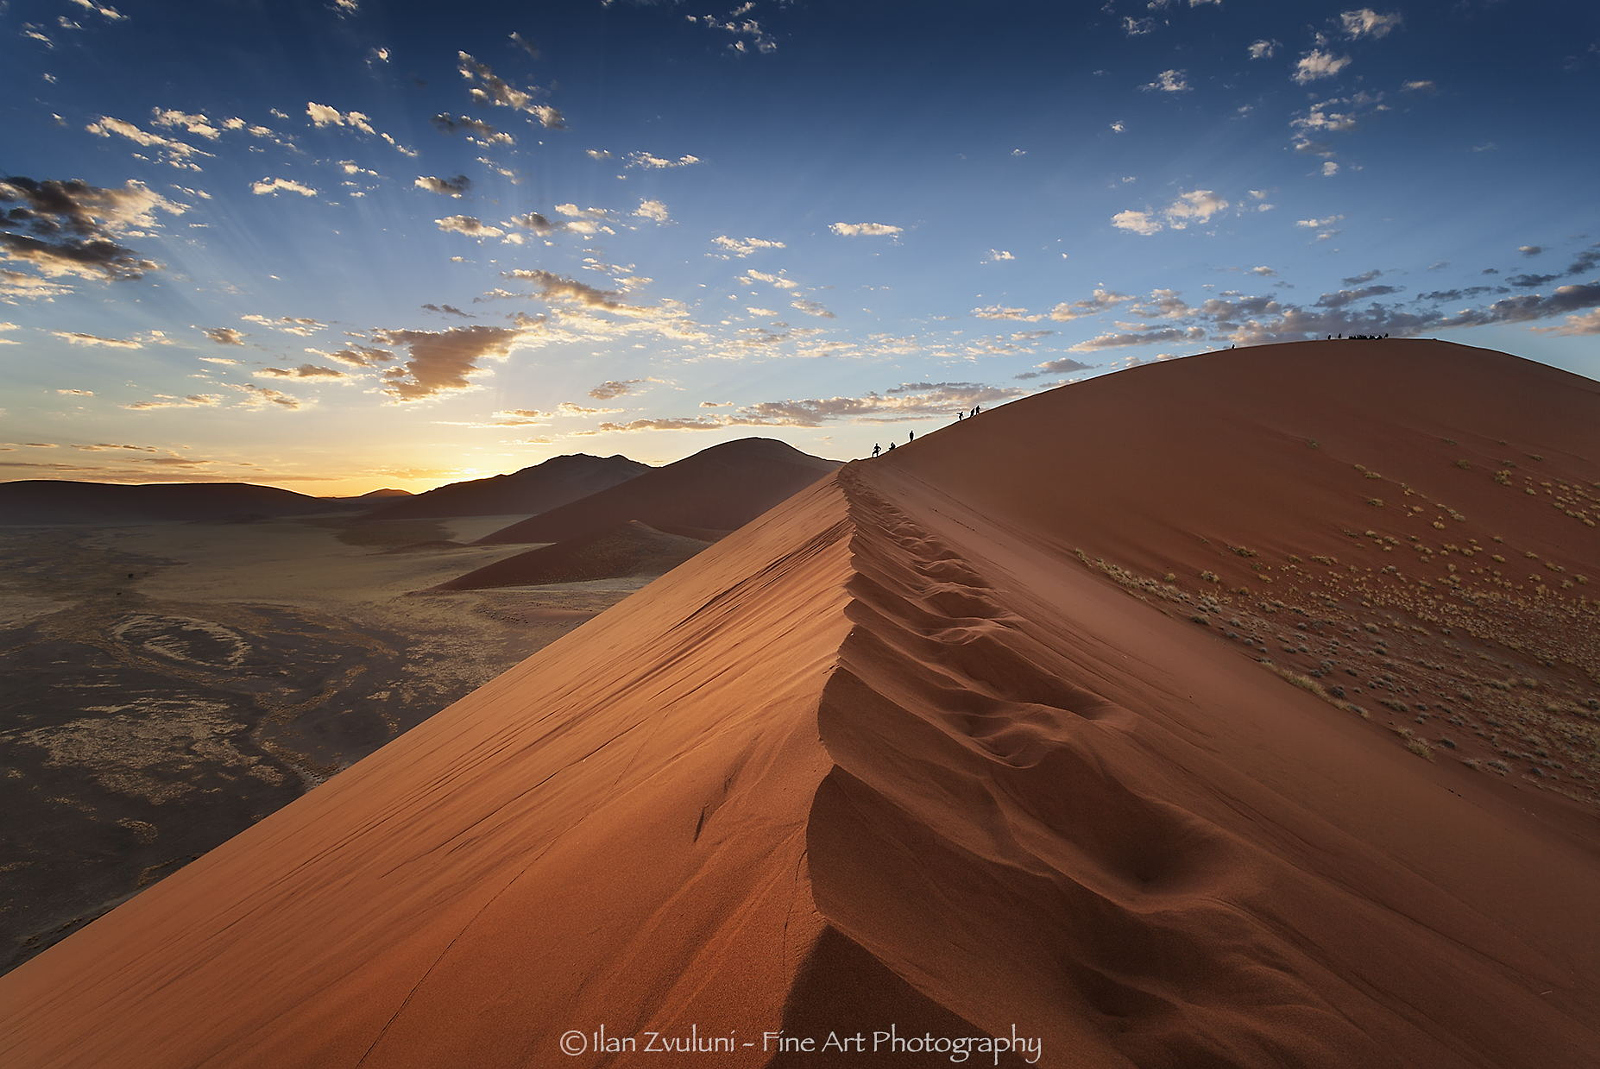 25 Photographs of Some of the Largest Sand Dunes on Earth